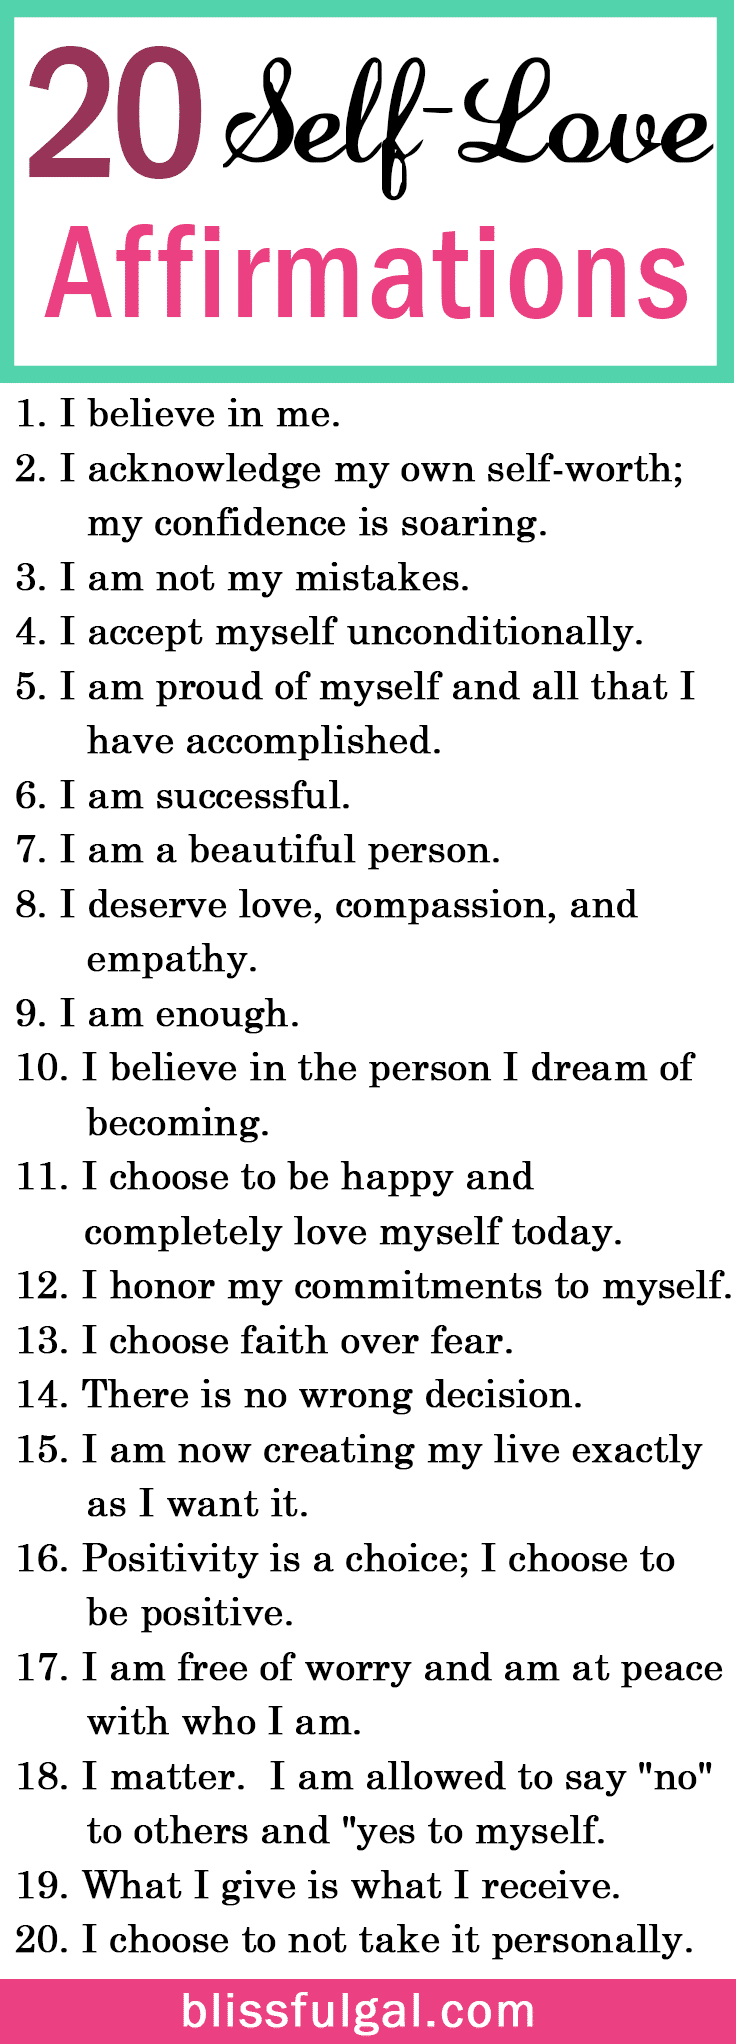 read this collection of positive affirmations for self love. #affirmation #selflove #behavior #selfcare #selfimprovement #happiness #selfhelp #awareness